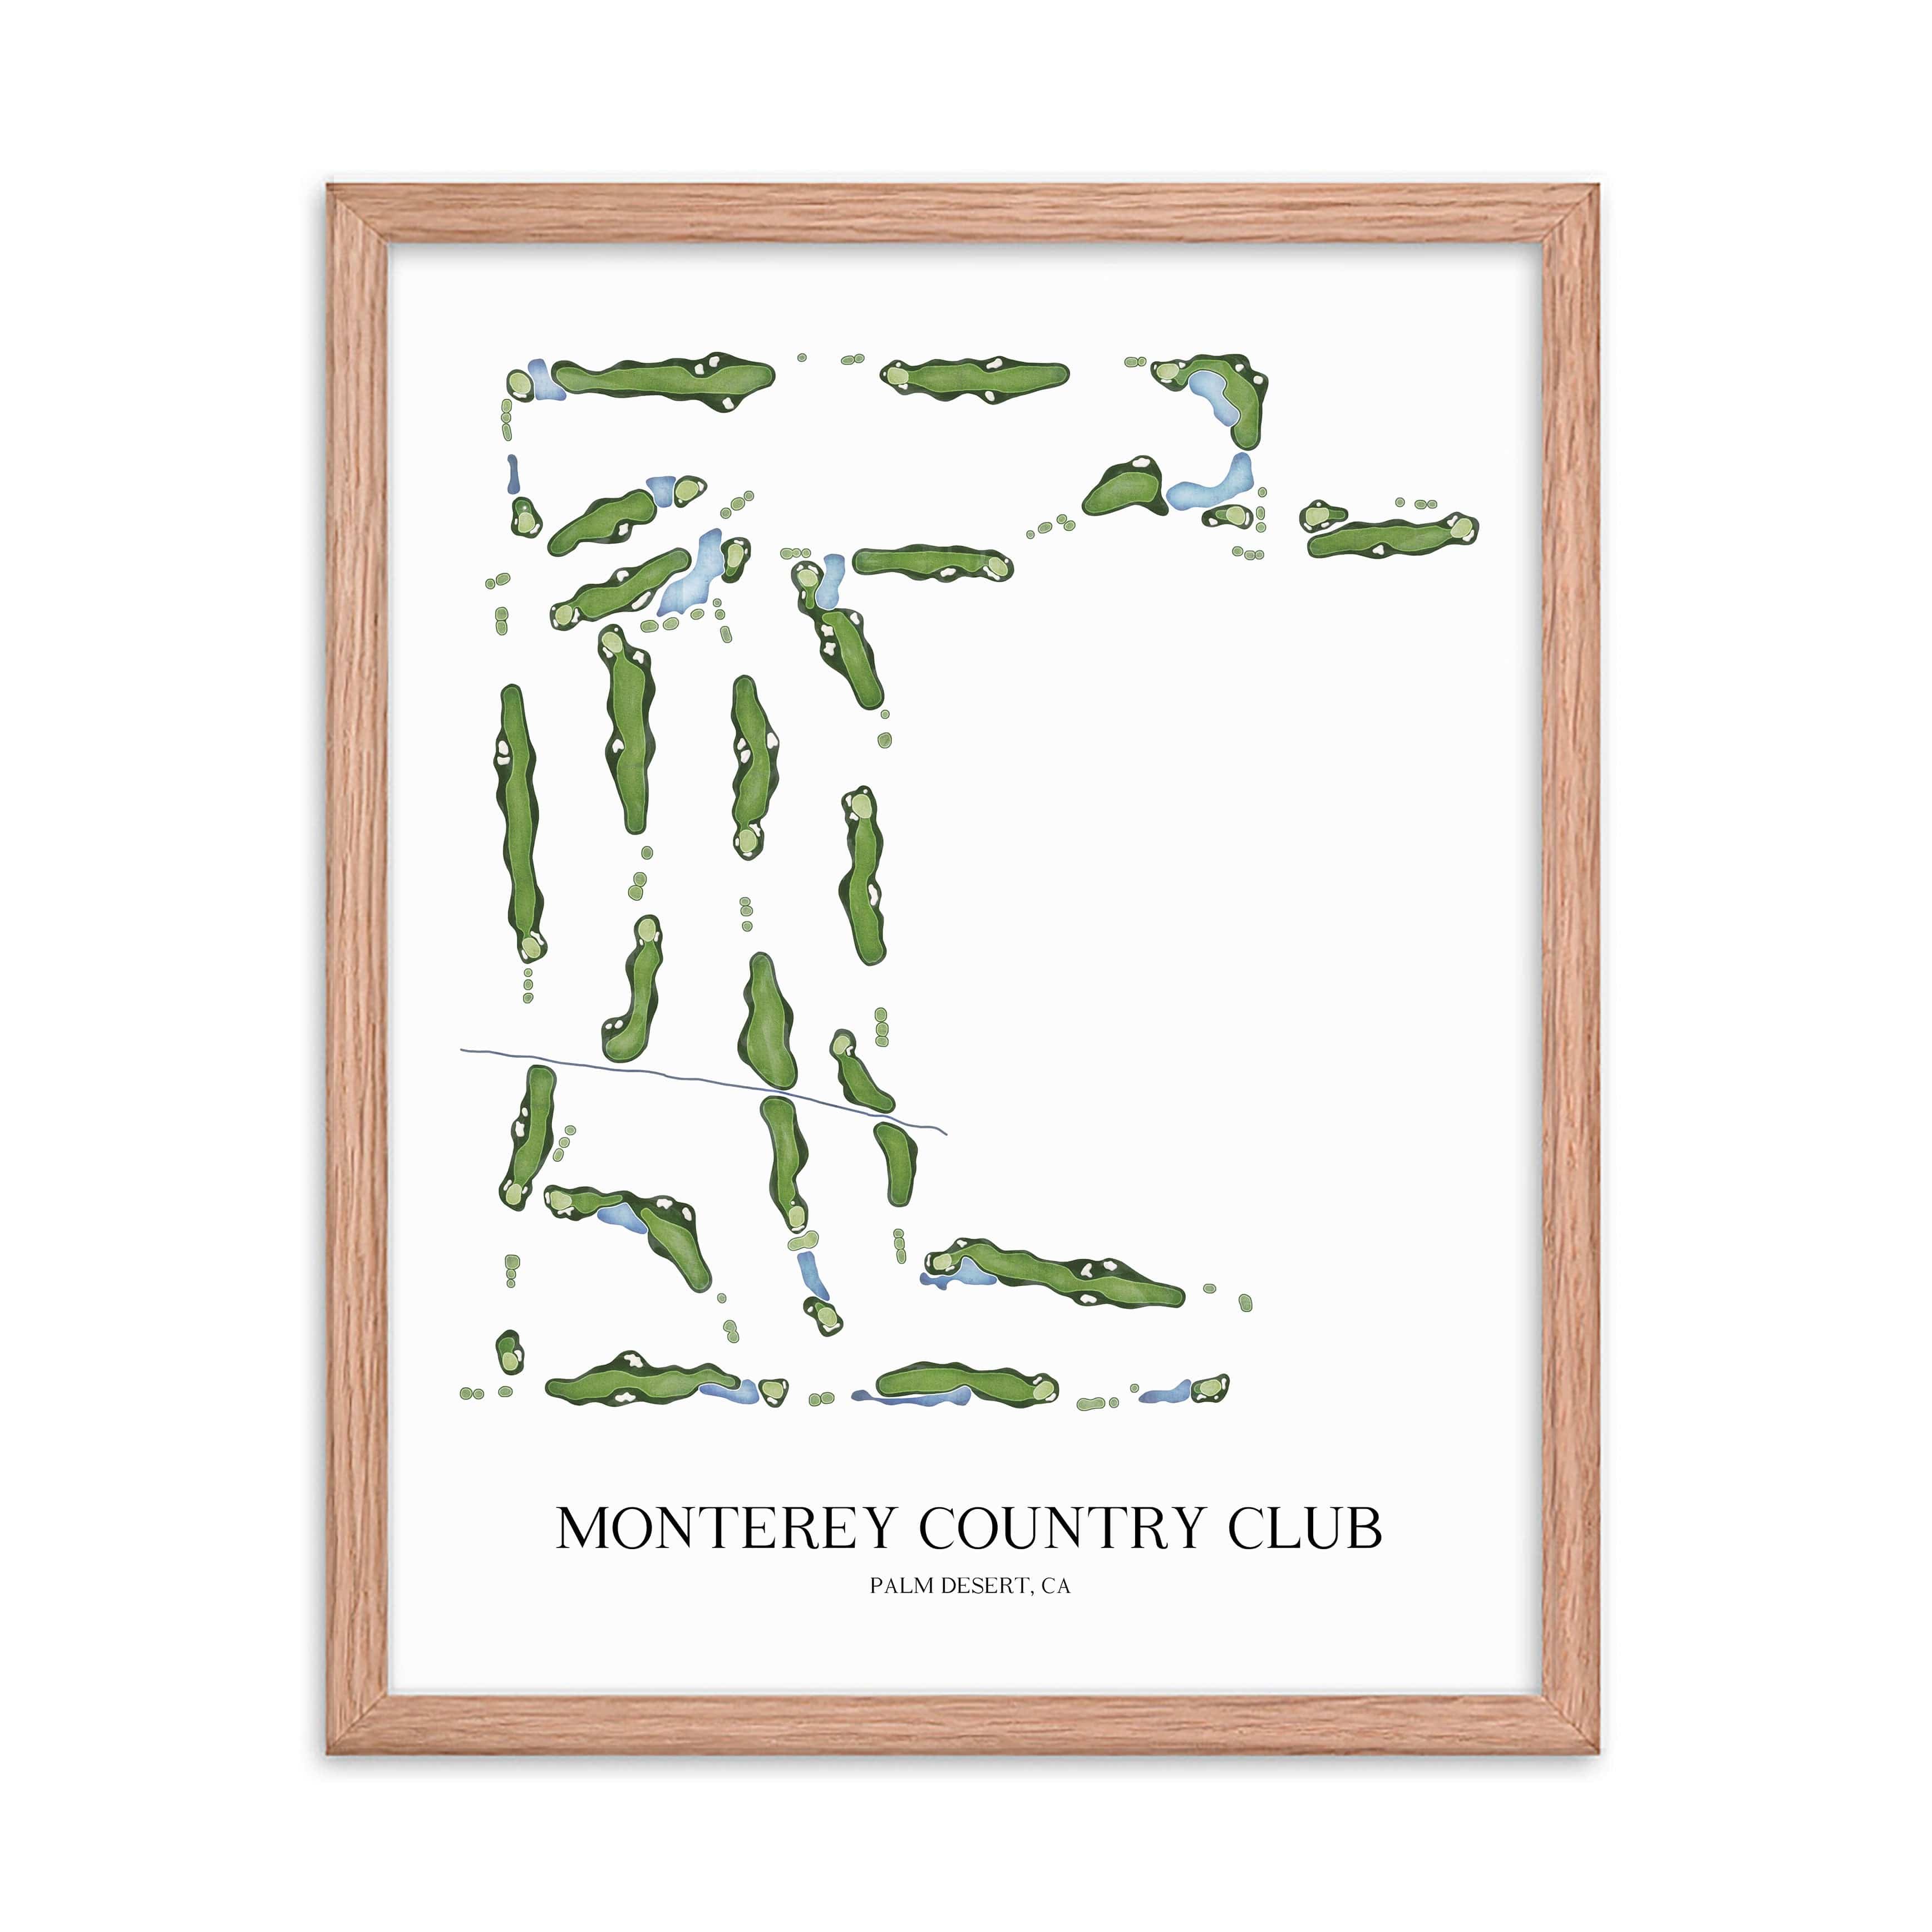 The 19th Hole Golf Shop - Golf Course Prints -  Monterey Country Club Golf Course Map